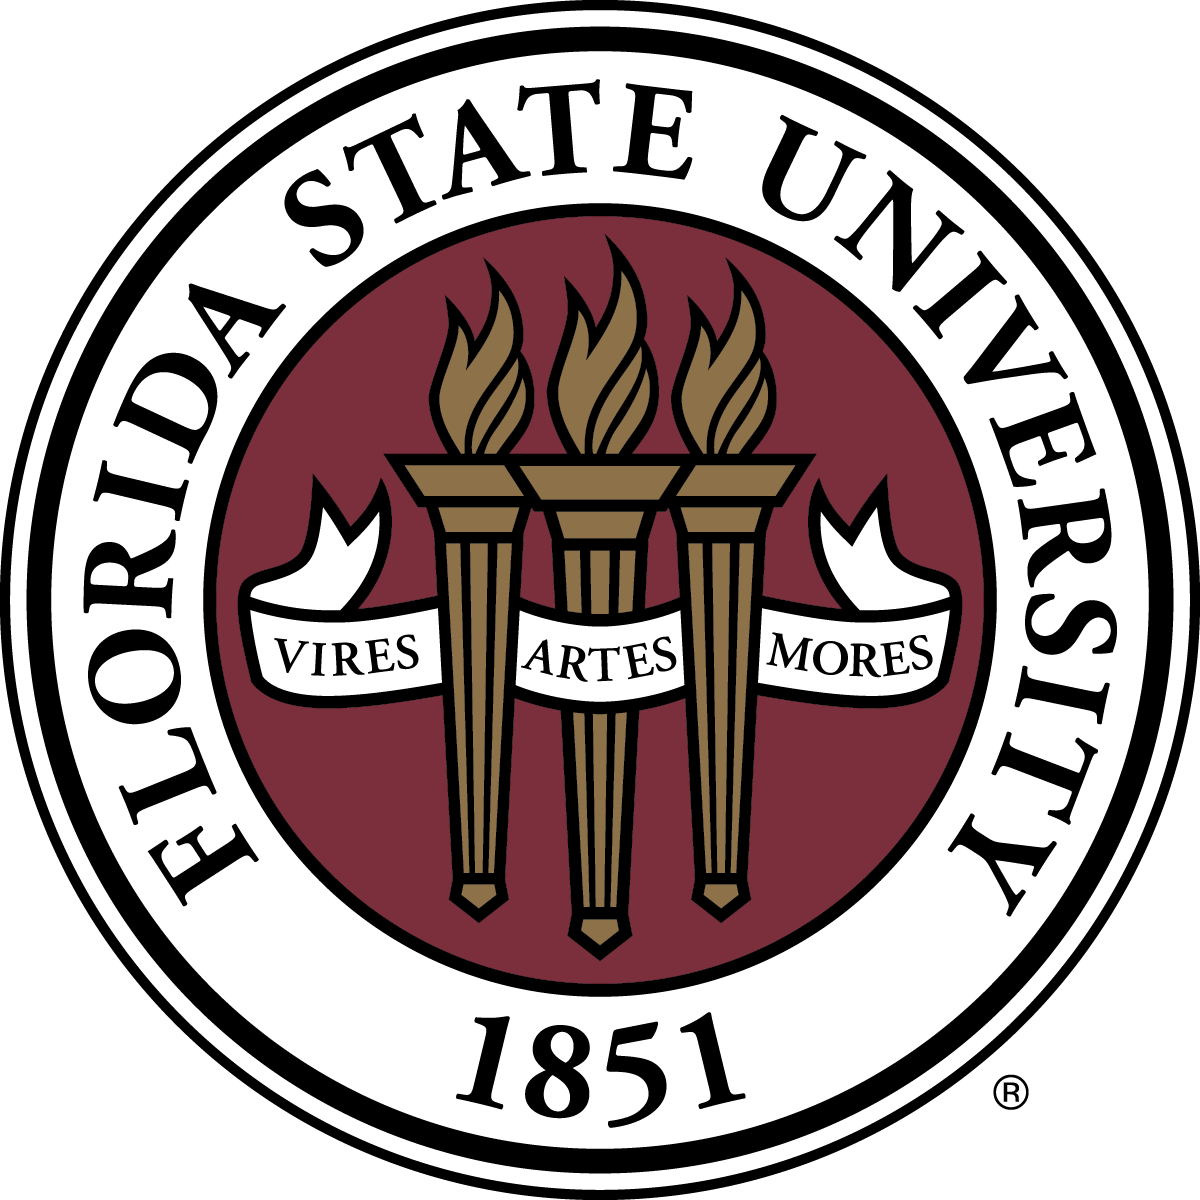 The official seal of Florida State University